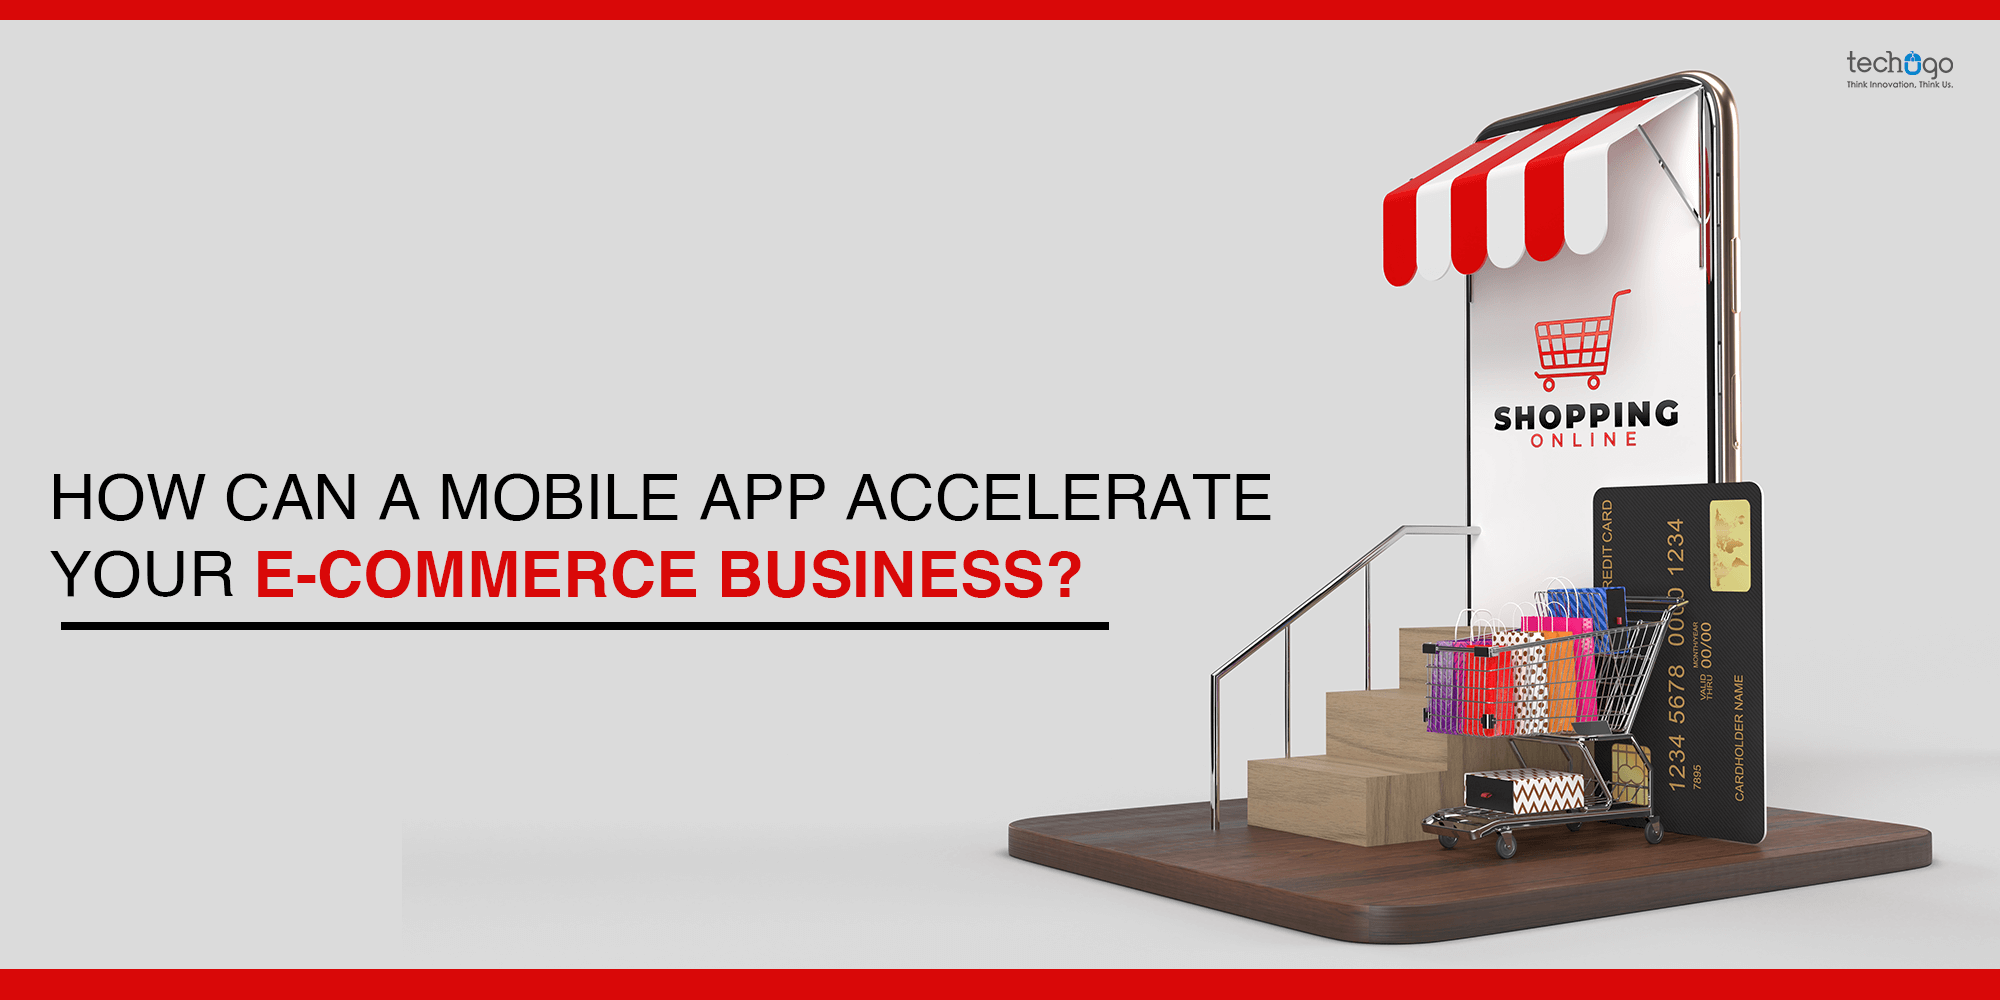 How Can a Mobile App Accelerate Your E-Commerce Business